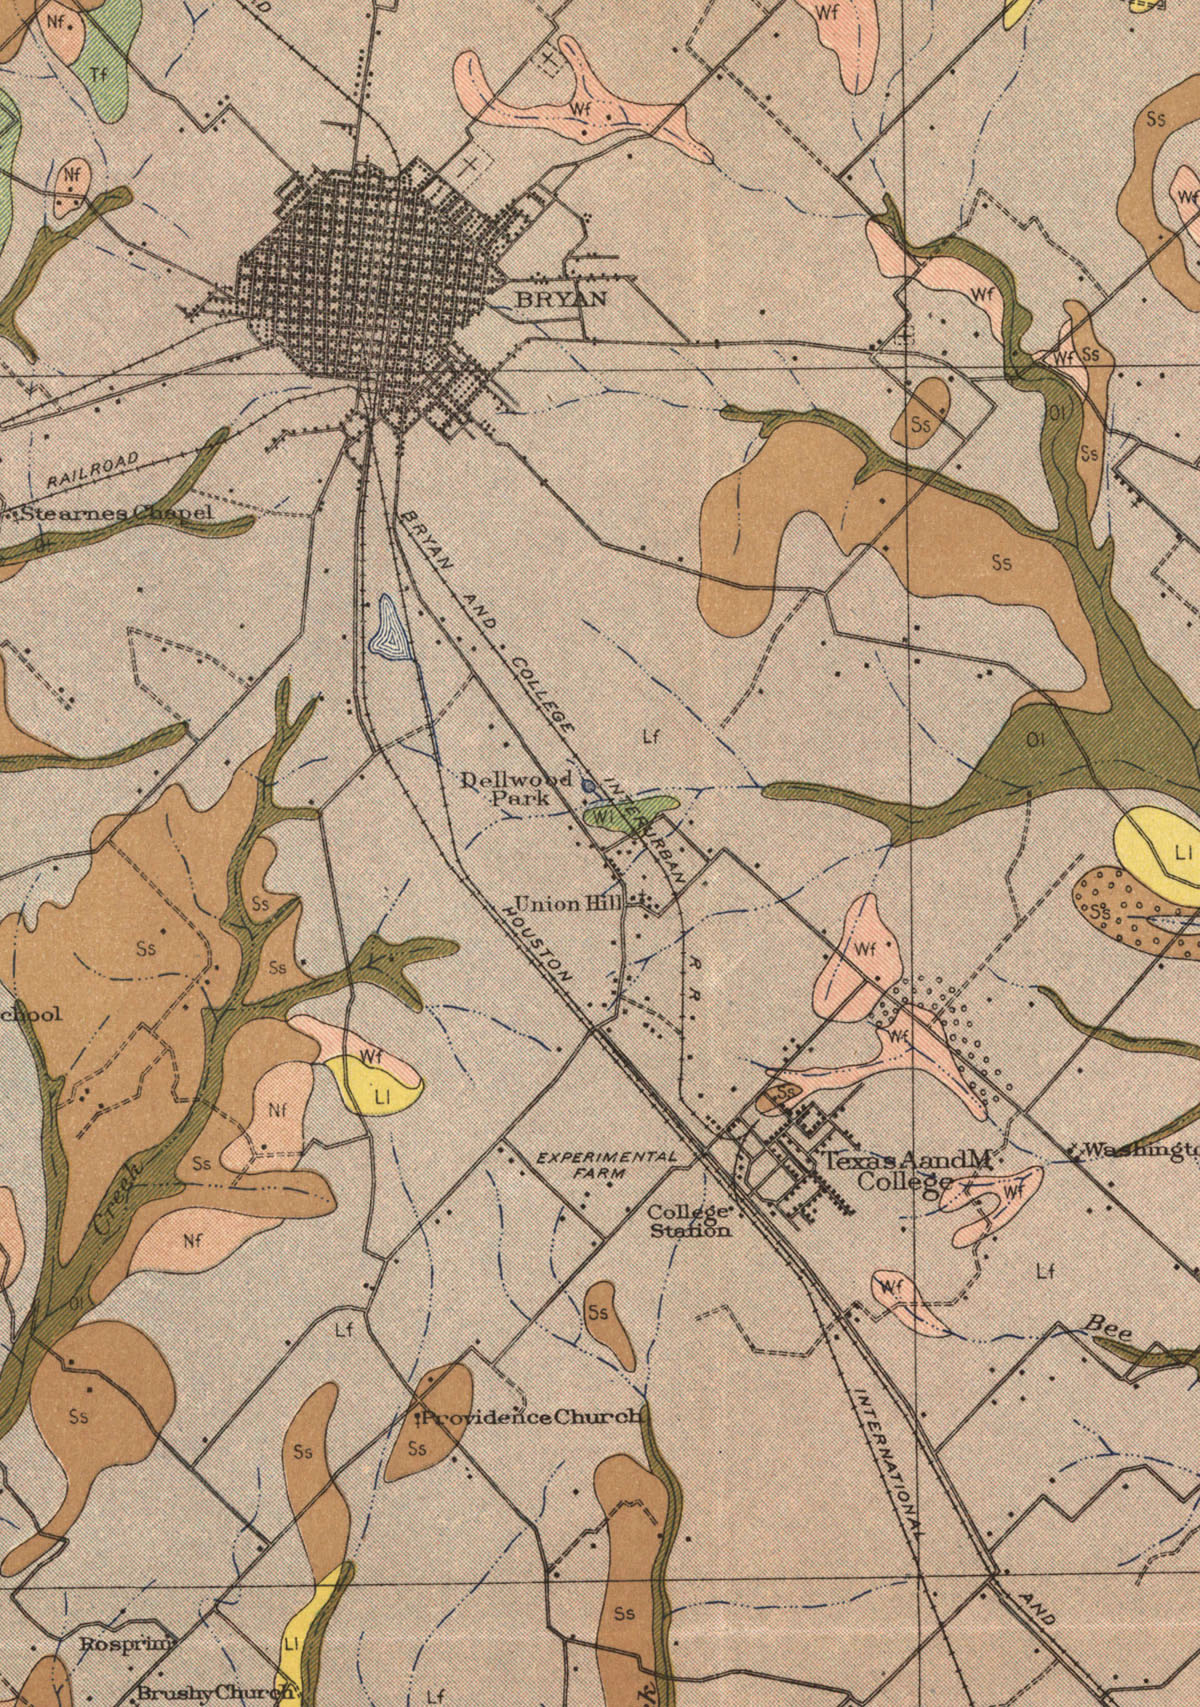 Bryan & College Interurban Railway Company (Tex.), Map Showing Route in 1914.